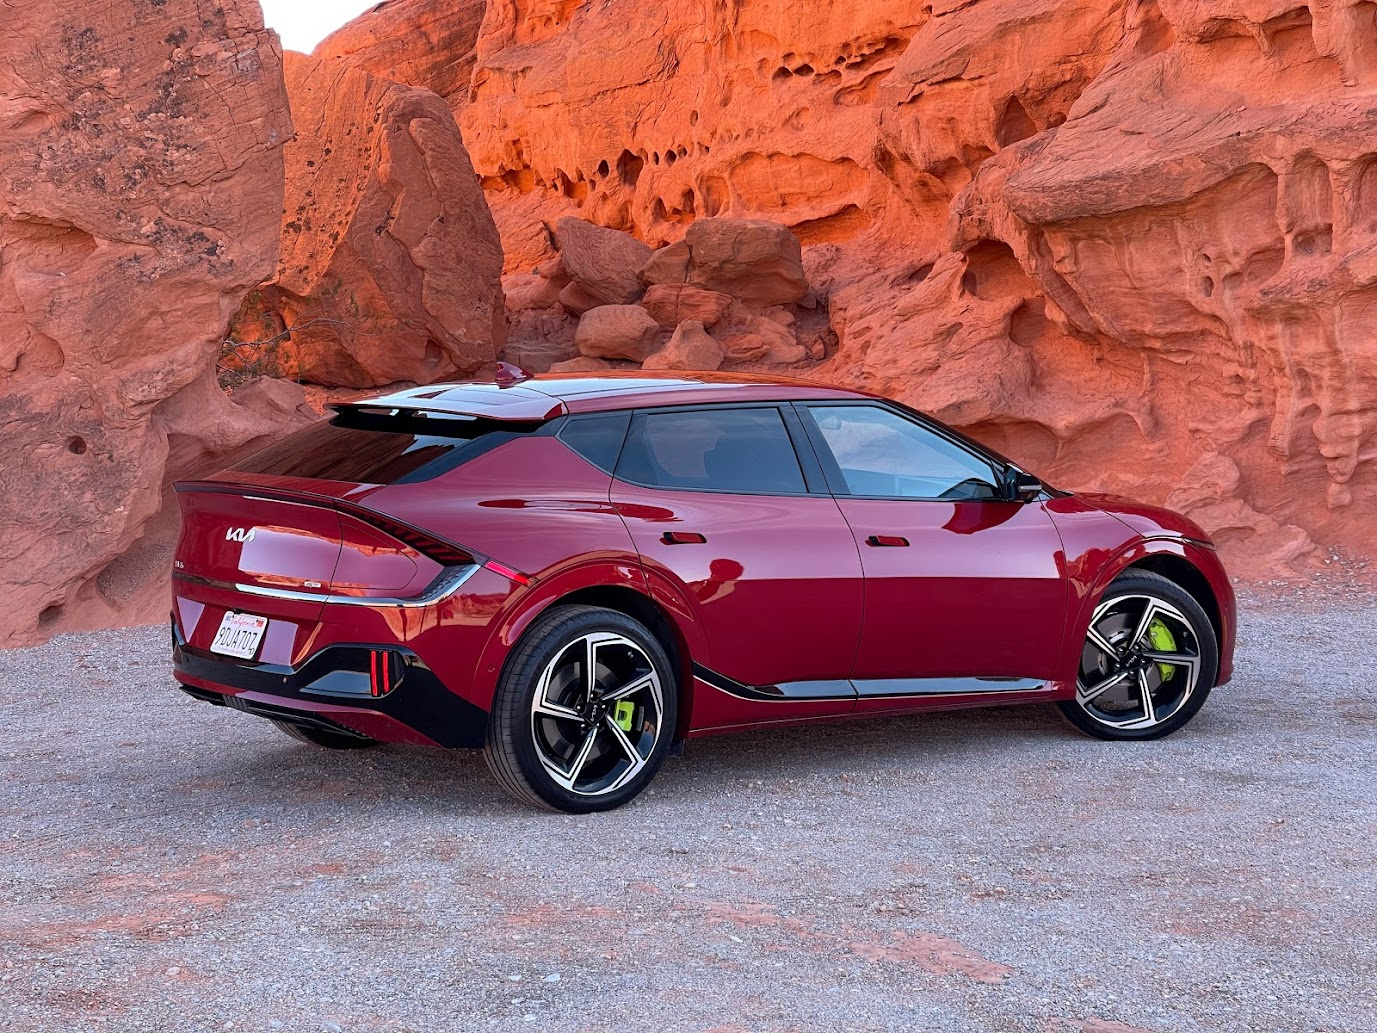 Kia's EV6 GT is a 576hp supercar in a handsome $60K CUV package